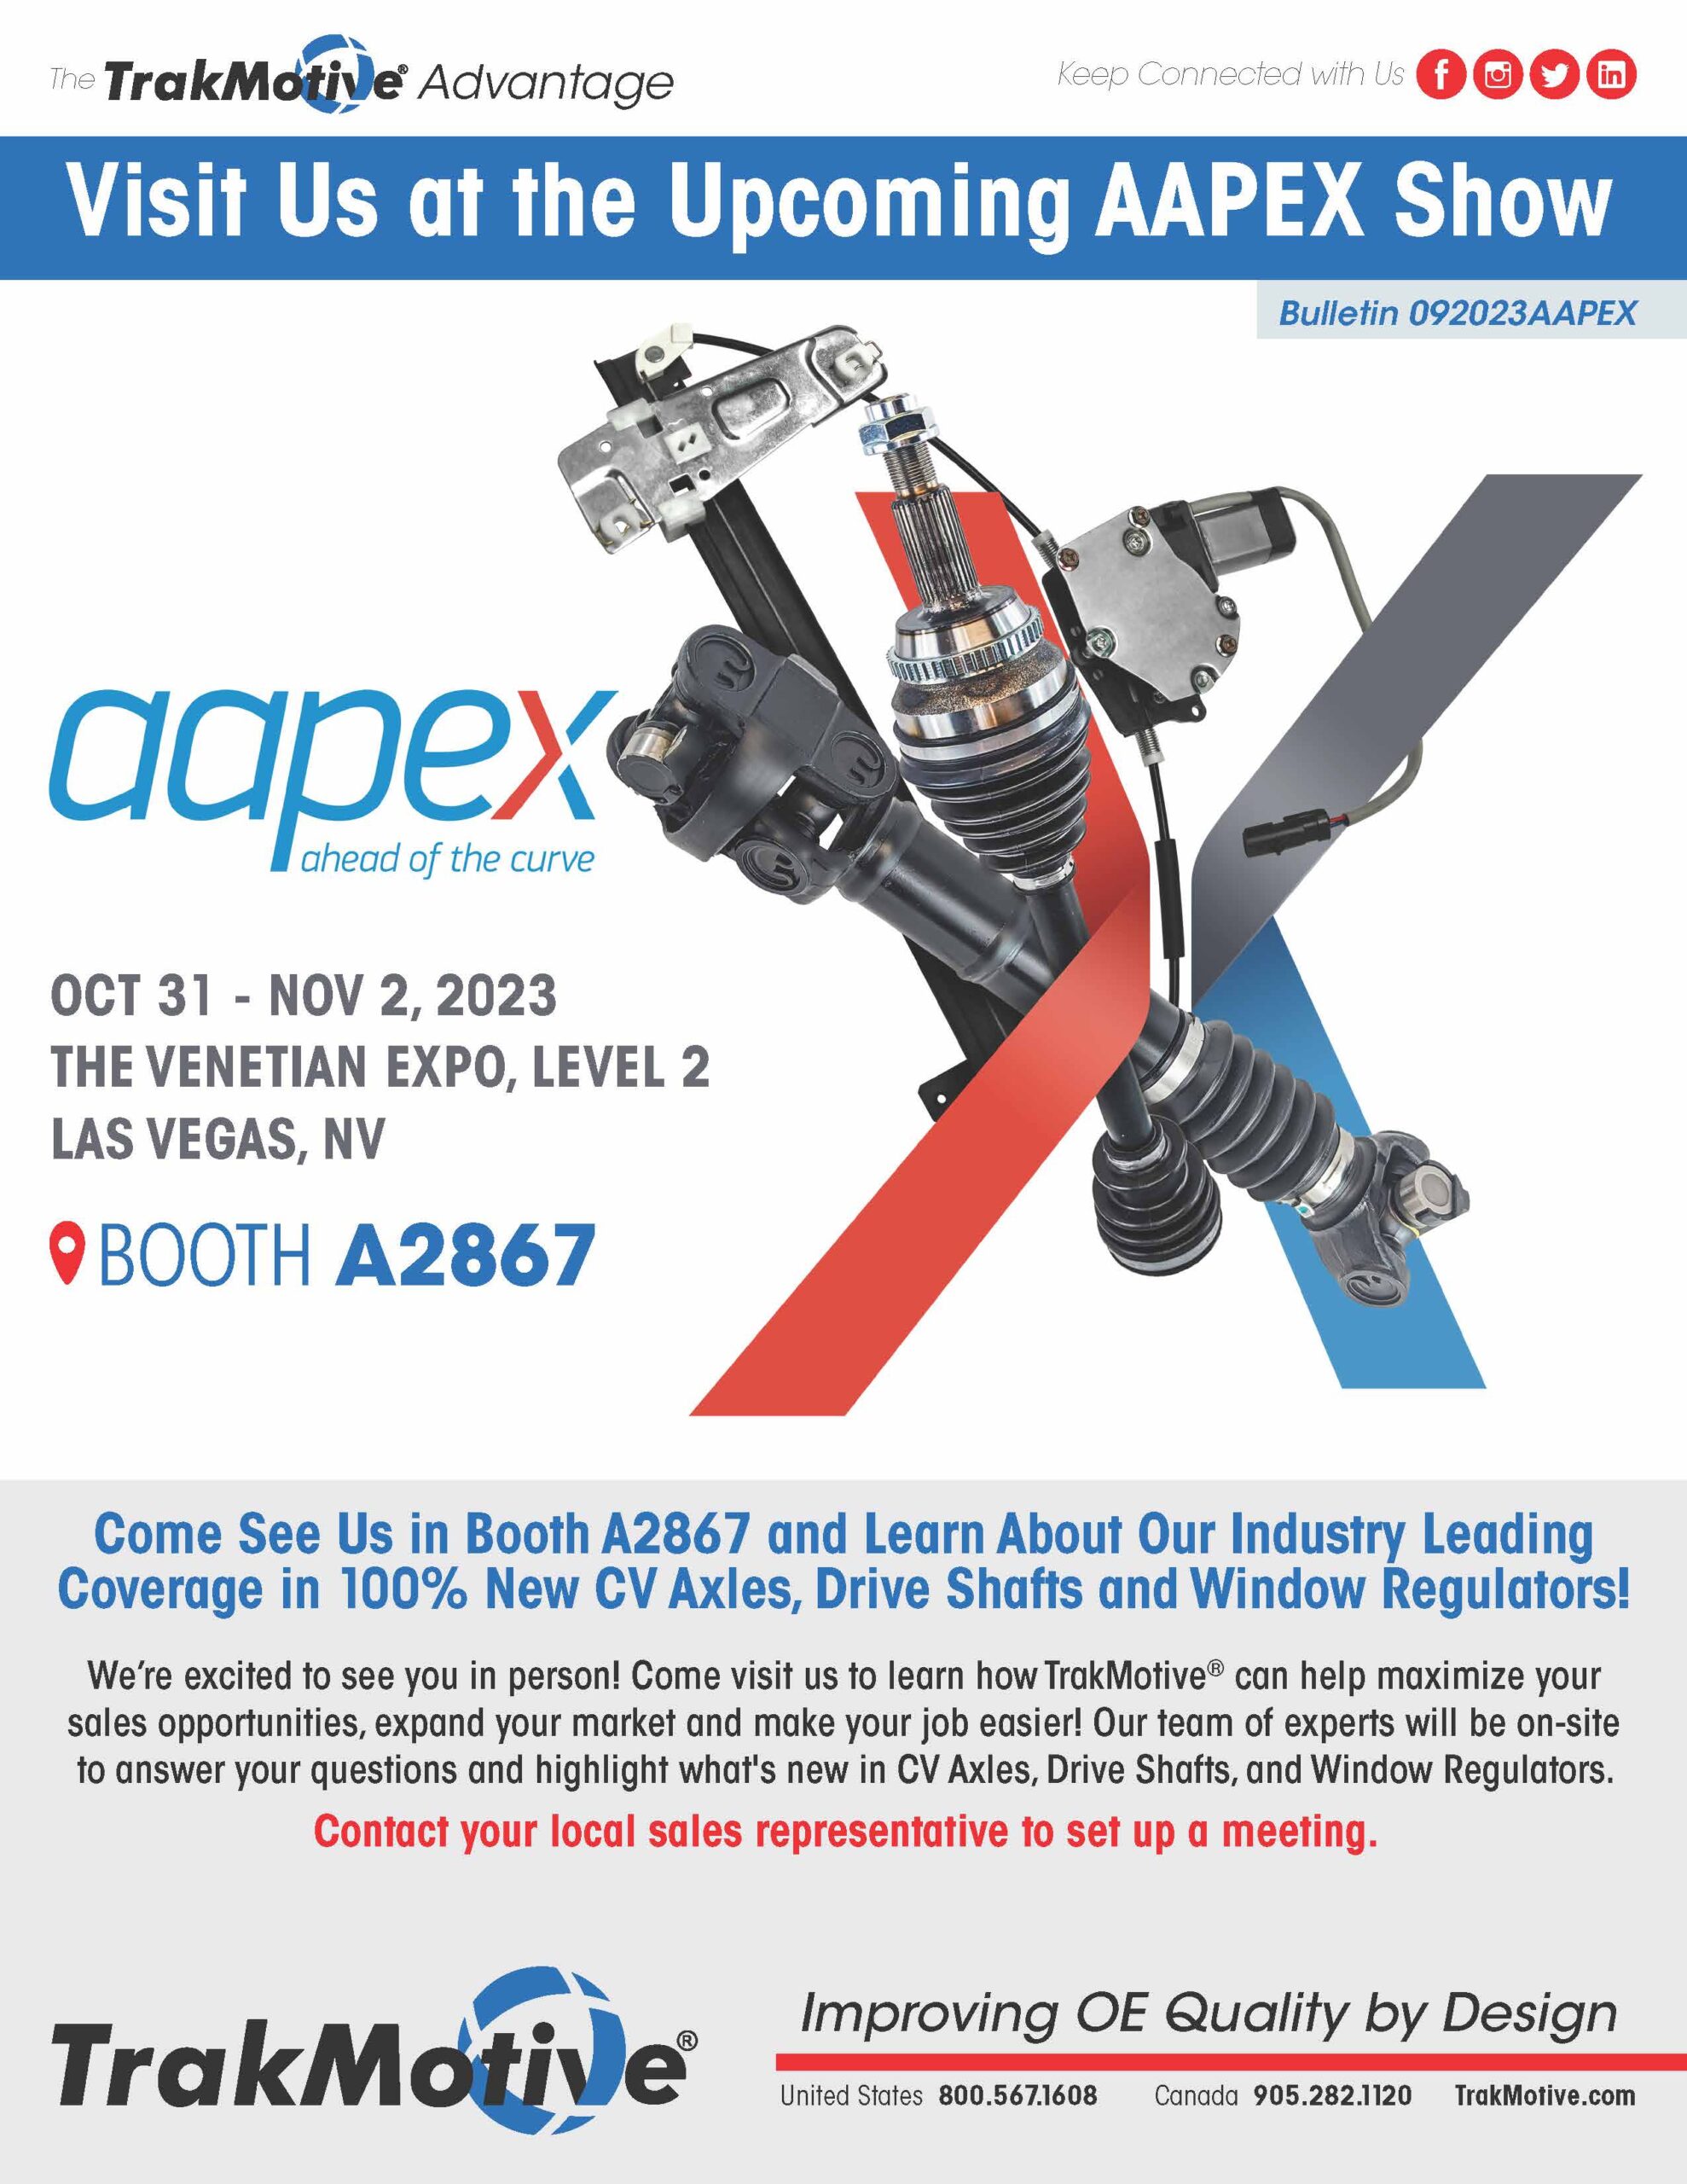 09/2023: TrakMotive: Visit Us at AAPEX – Booth A2867